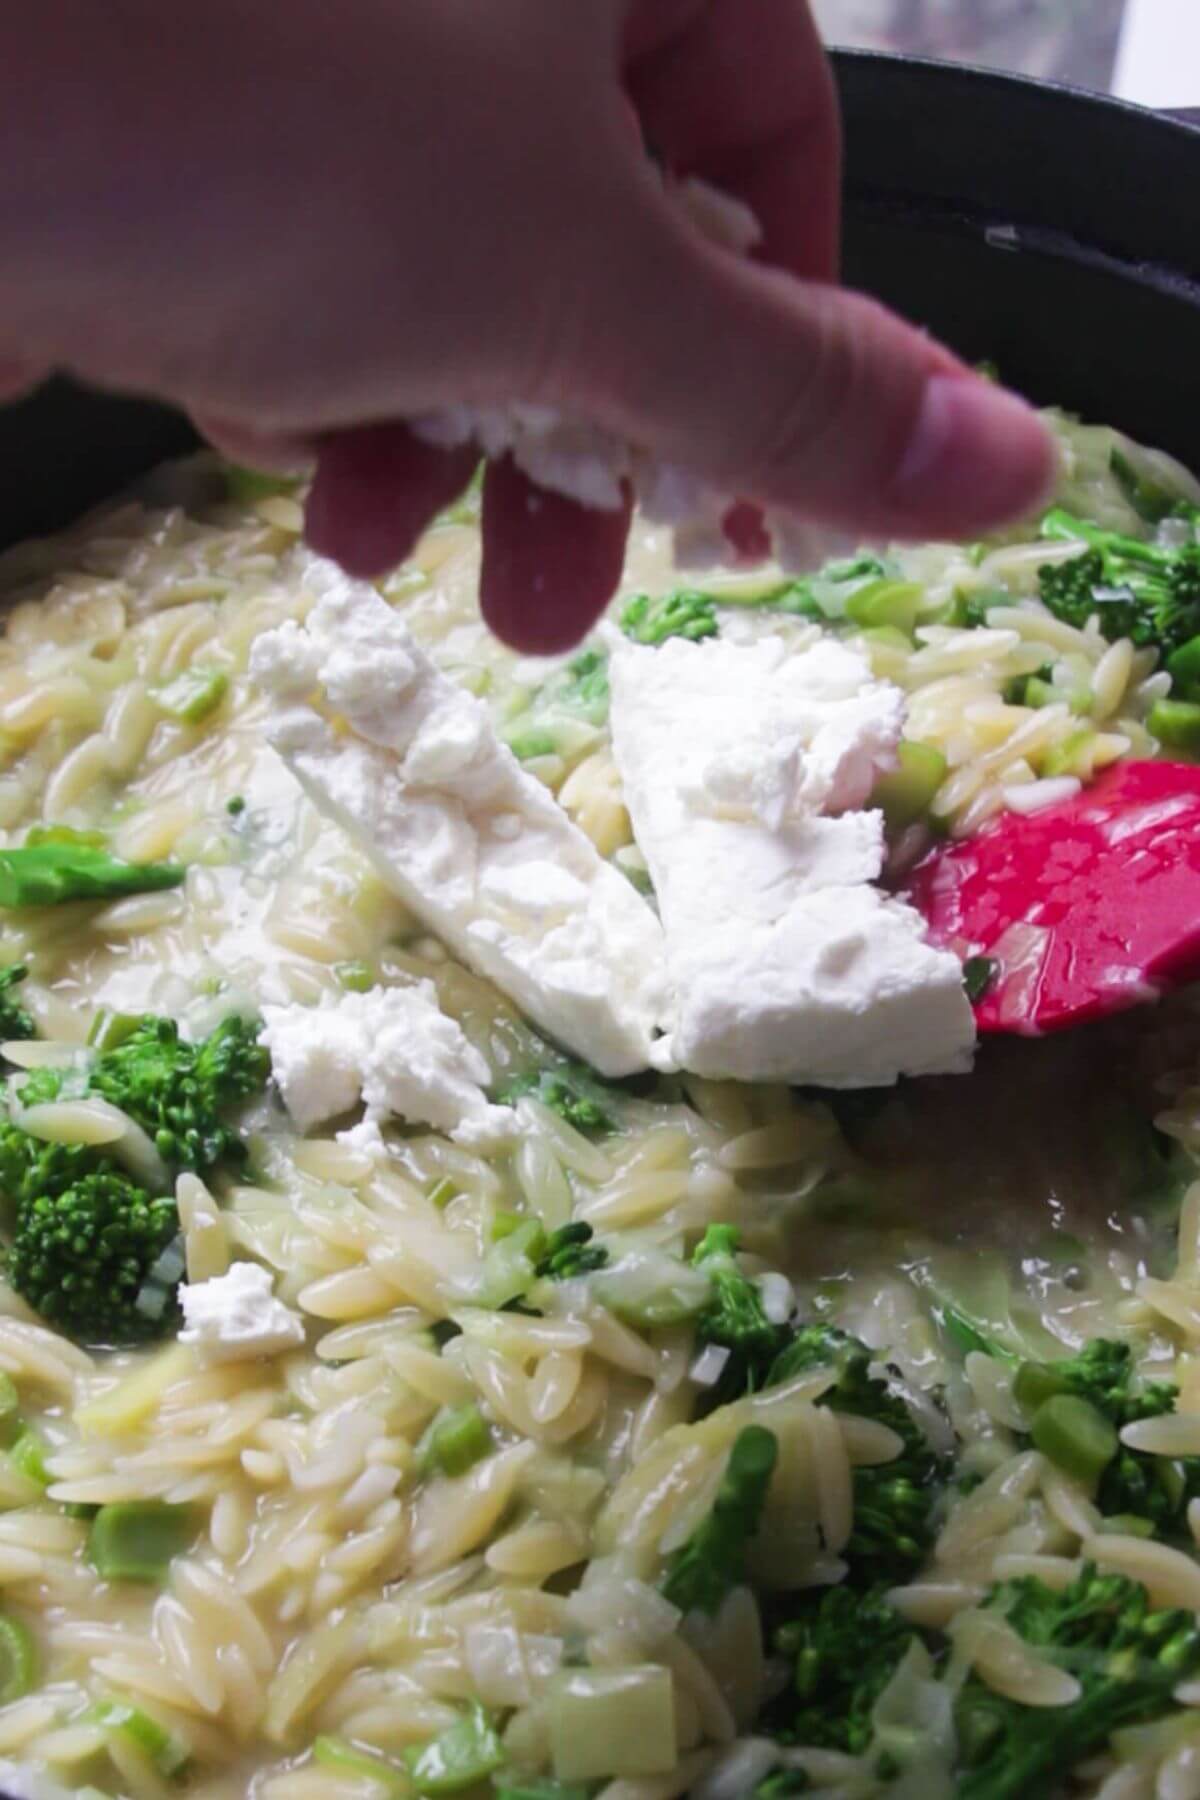 Hand crumbling feta into creamy orzo in a black and red pan.